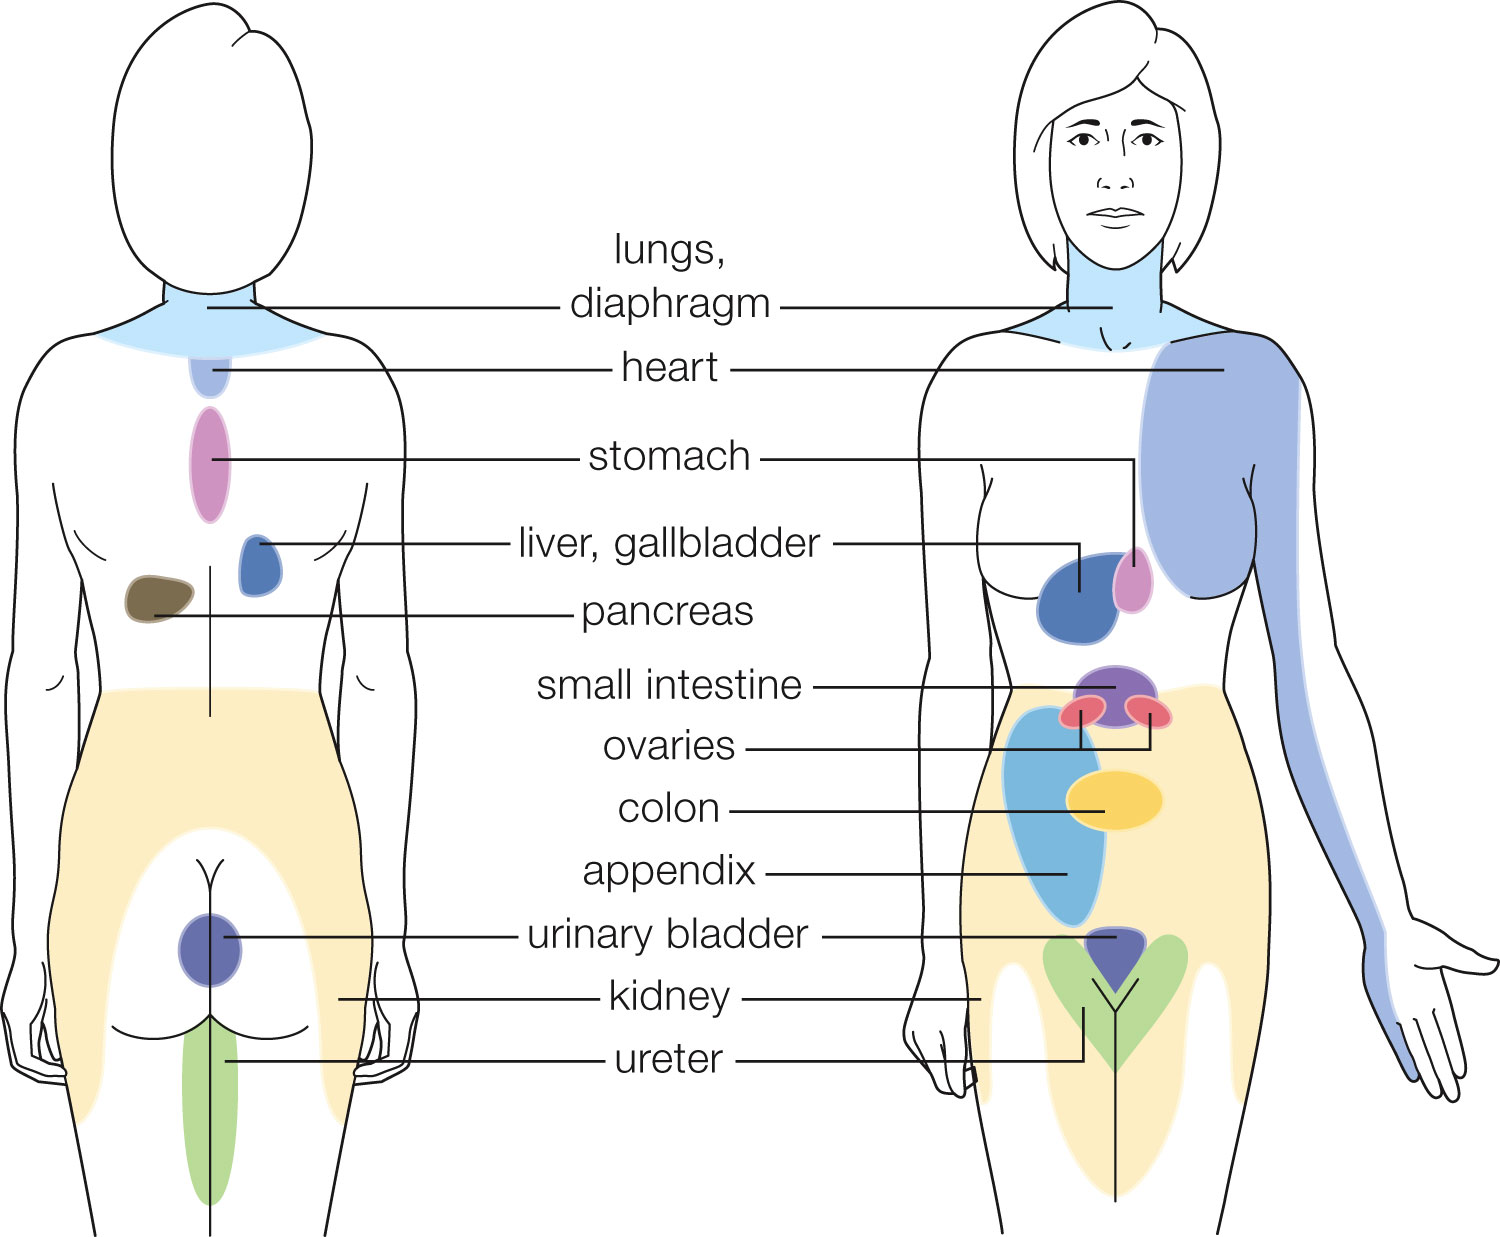 Sites of referred pain